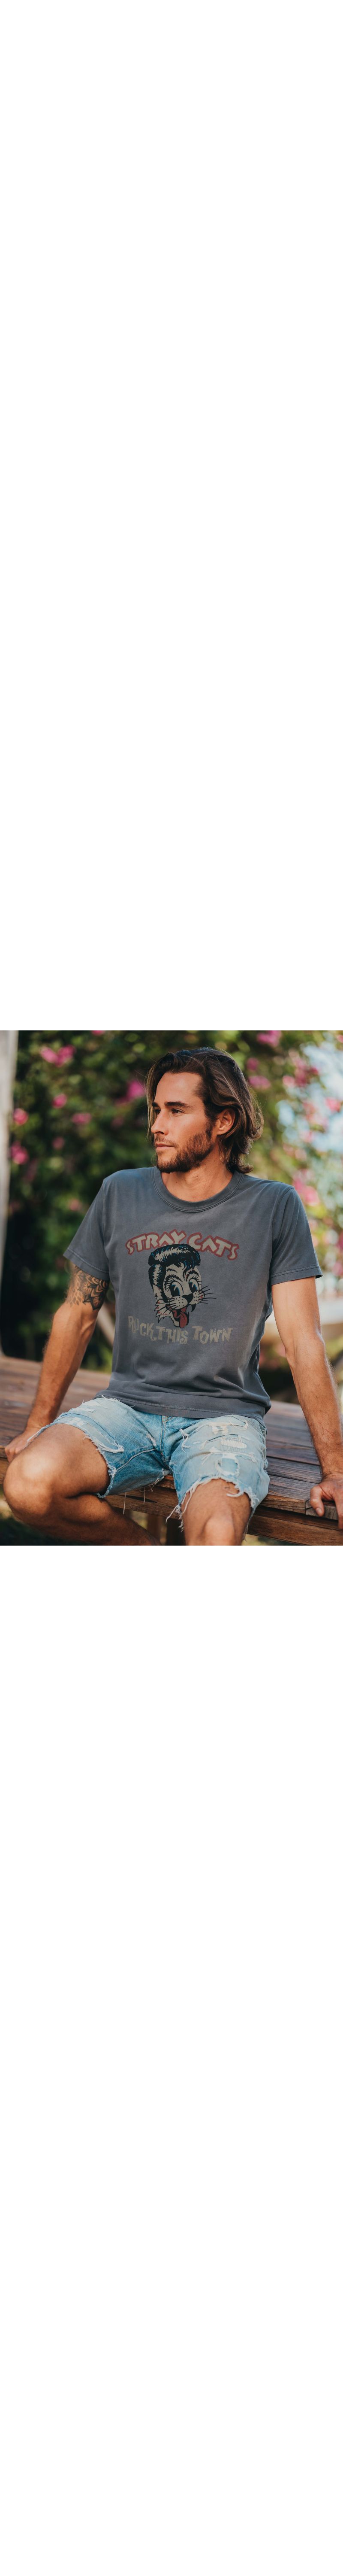 T-shirt Vintage Homme Gris Stray Cats